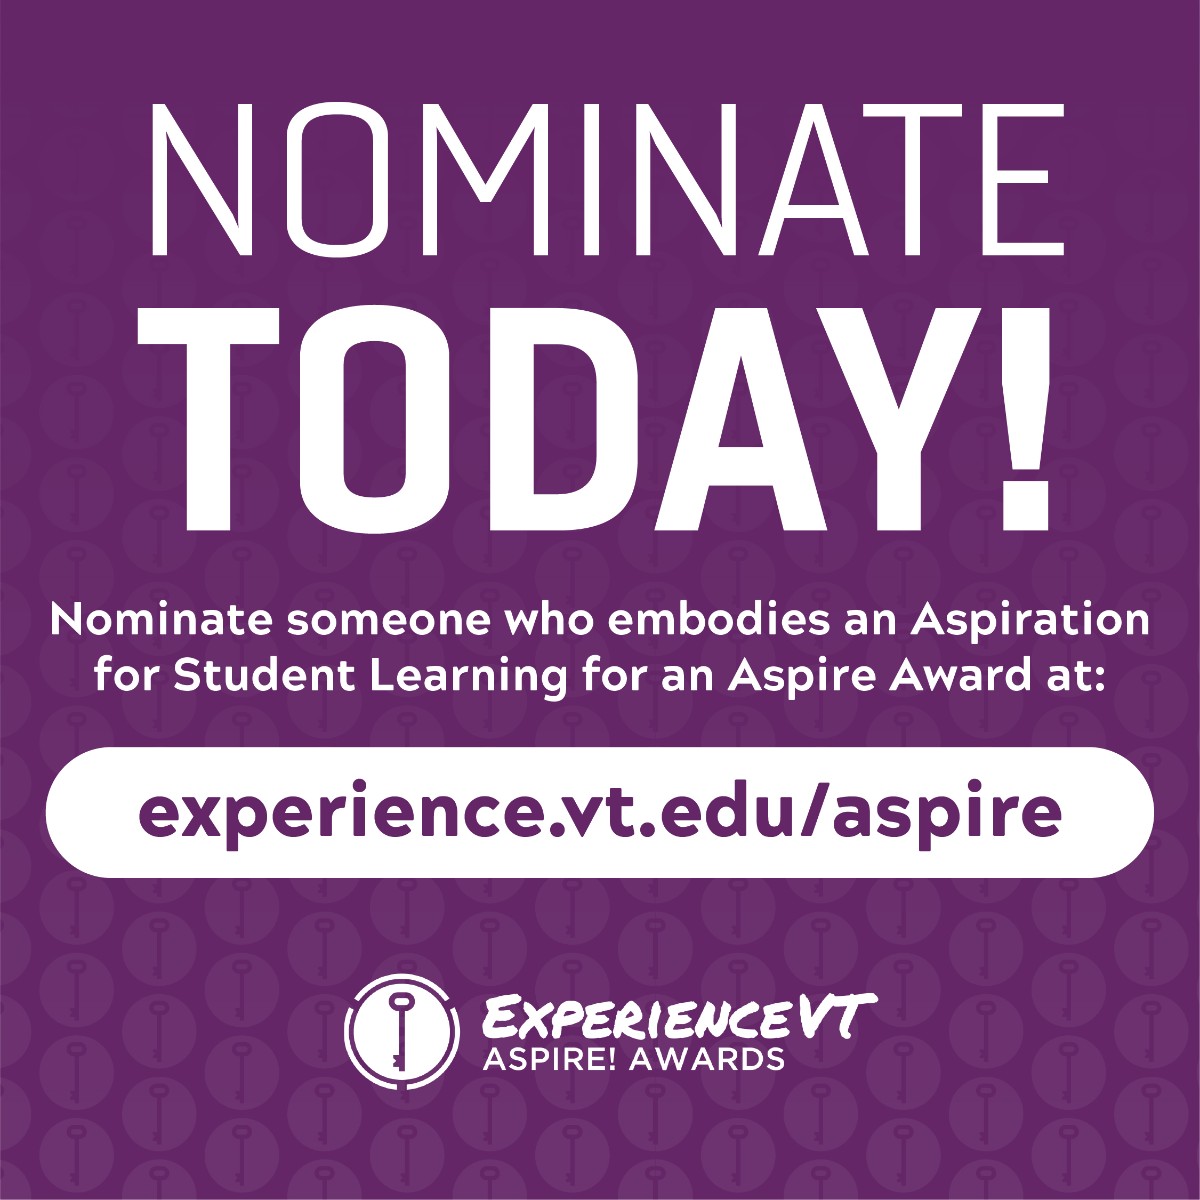 ➡️ Know a student or employee who exemplifies the Aspirations for Student Learning? Nominate them for an Aspire! Award today! 🔆 brnw.ch/21wIVc0